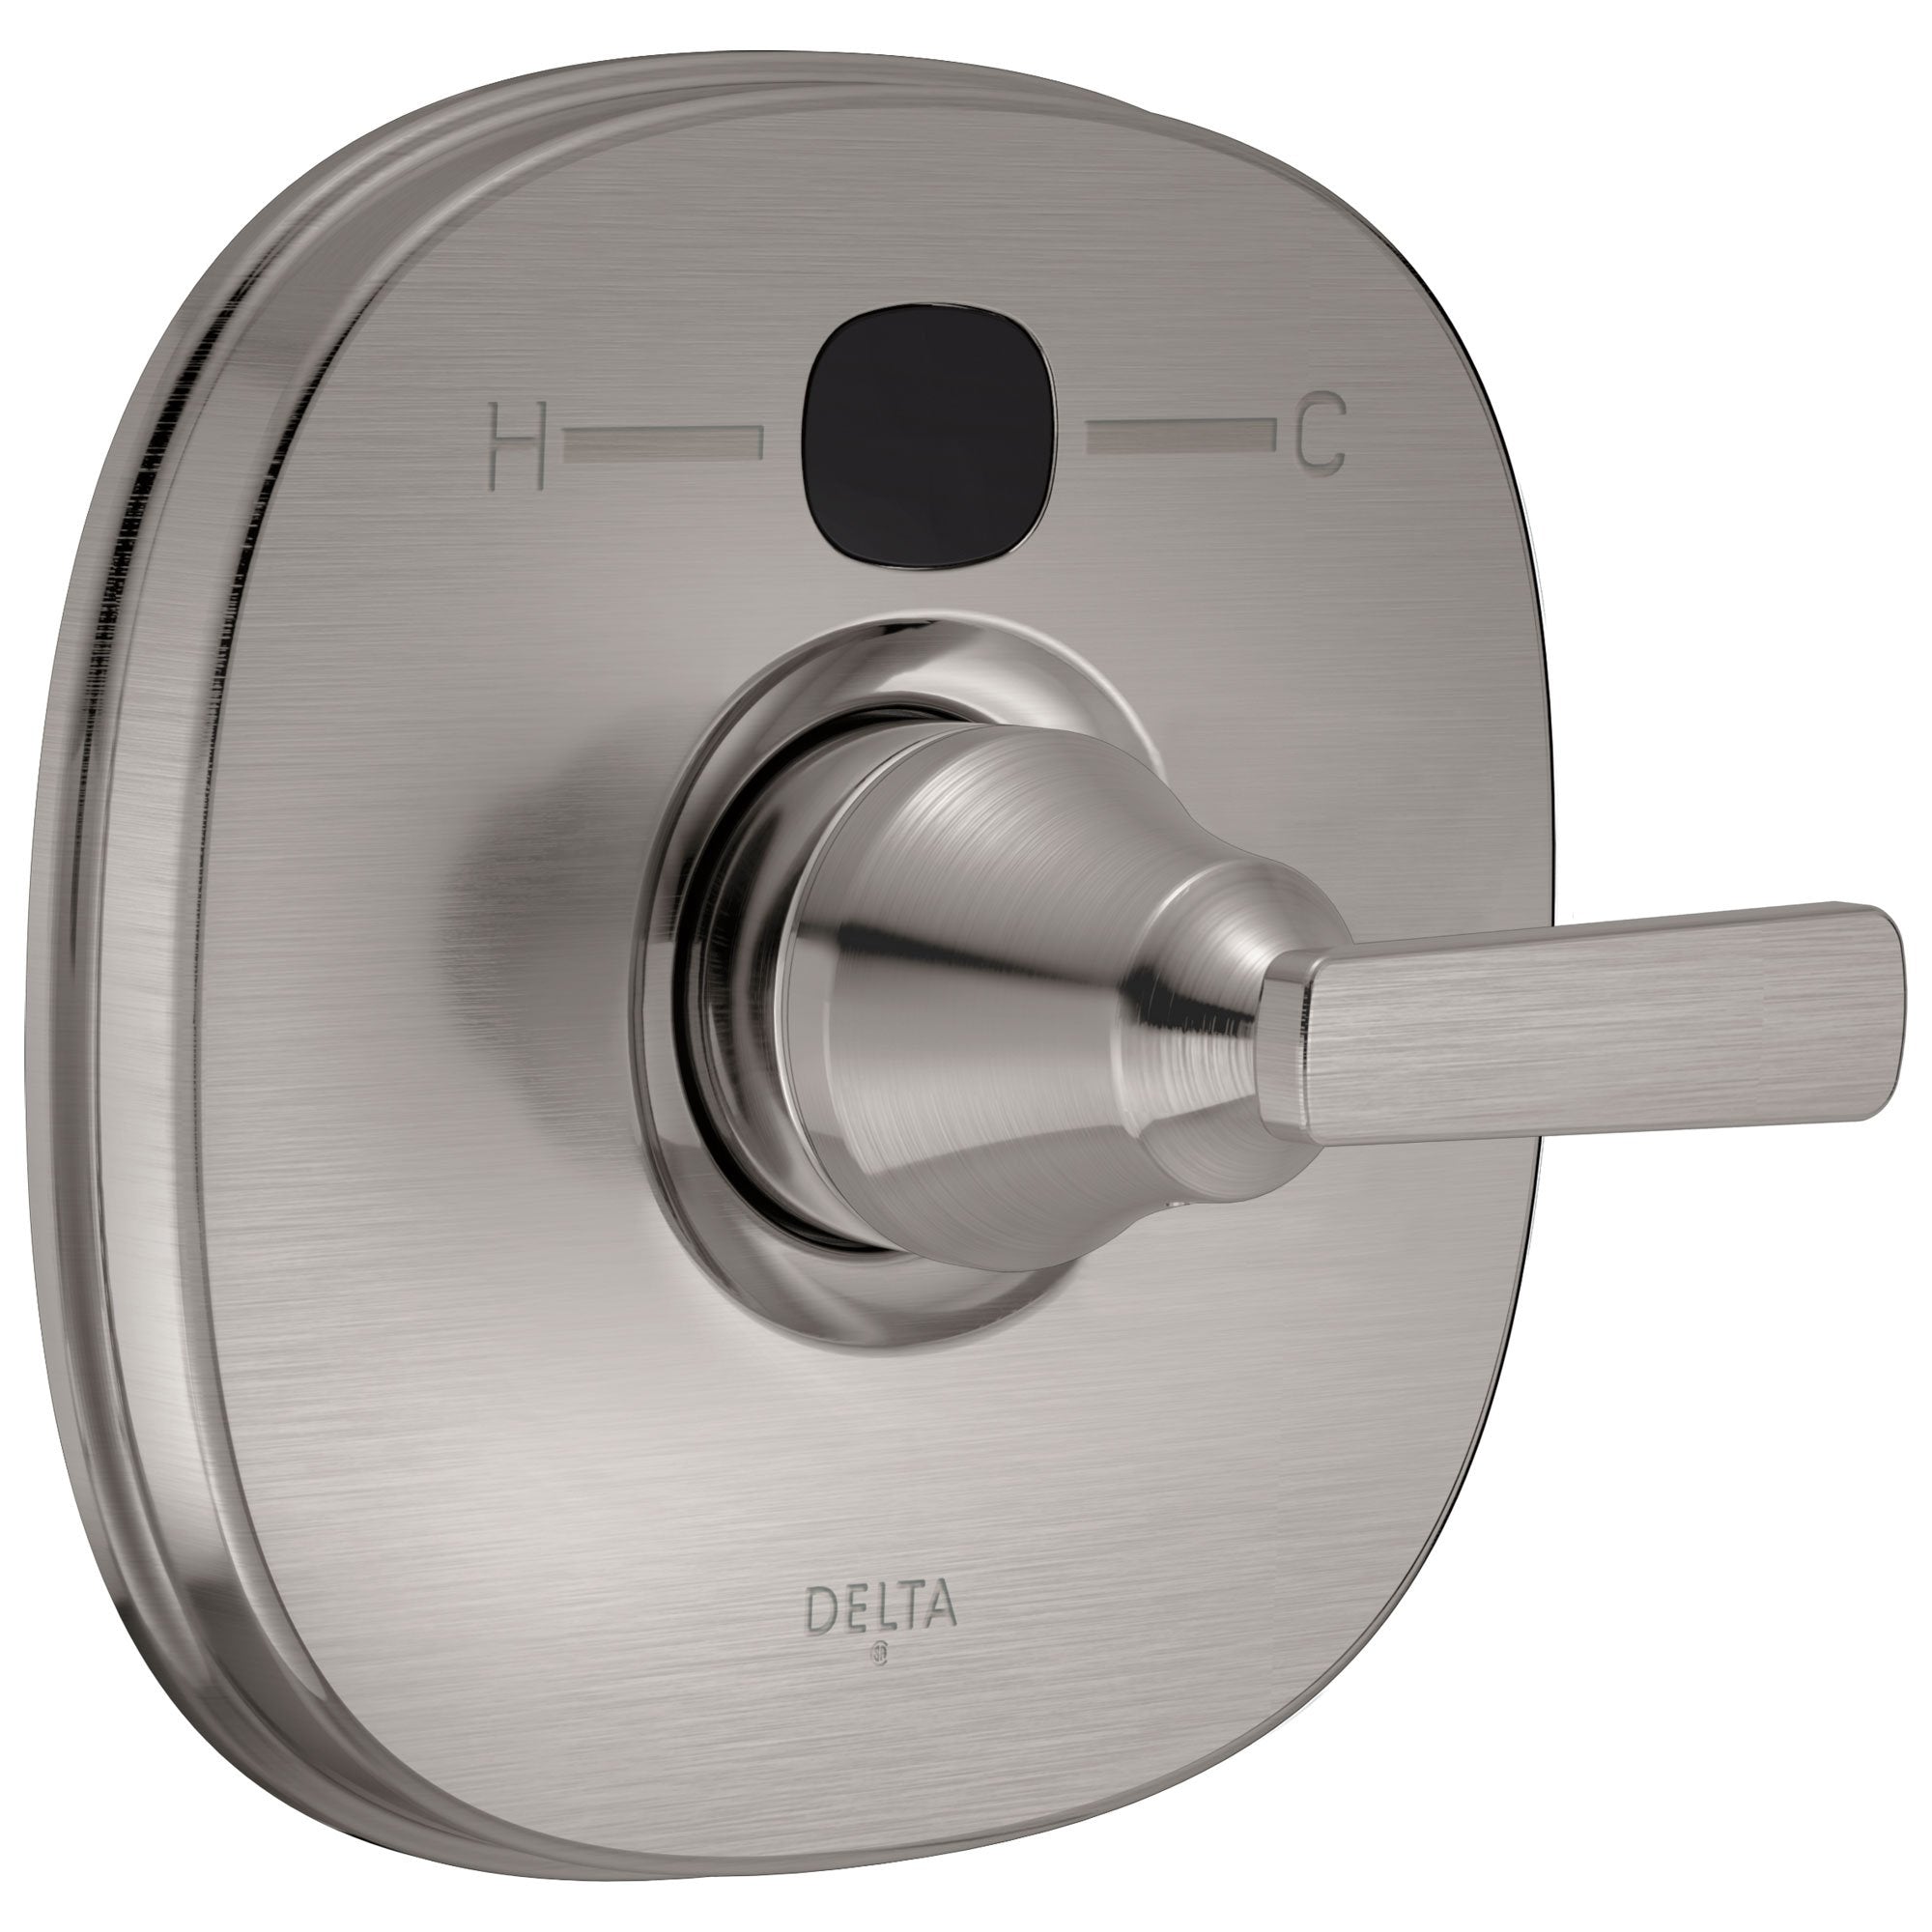 Delta Stainless Steel Finish Ashlyn Transitional 14 Series Digital Display Temp2O Shower Valve Control INCLUDES Single Handle and Valve with Stops D1619V